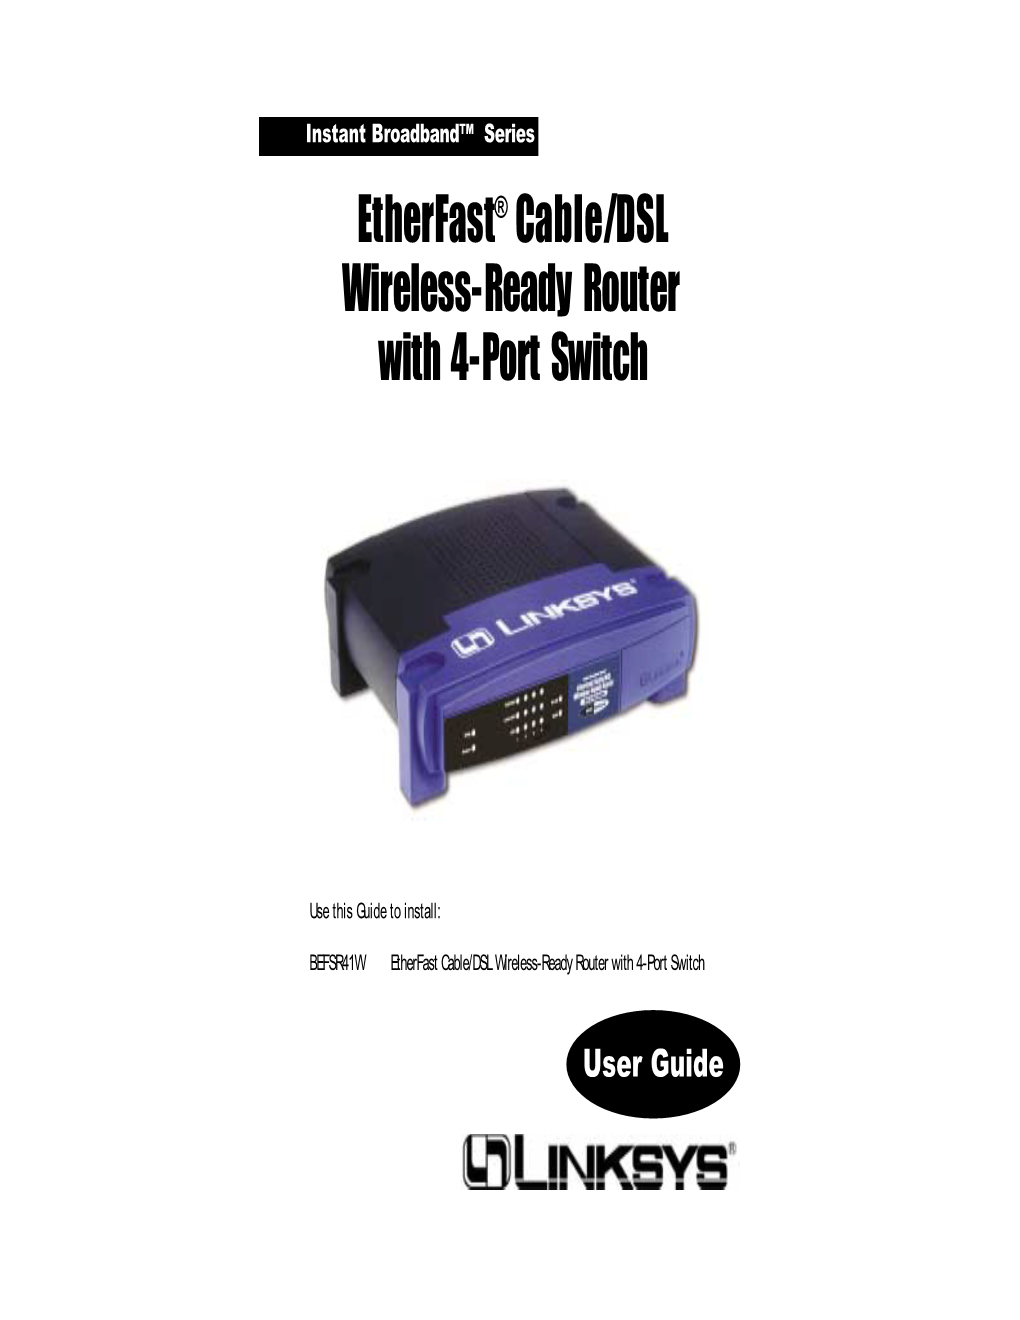 Etherfast® Cable/DSL Wireless-Ready Router with 4-Port Switch